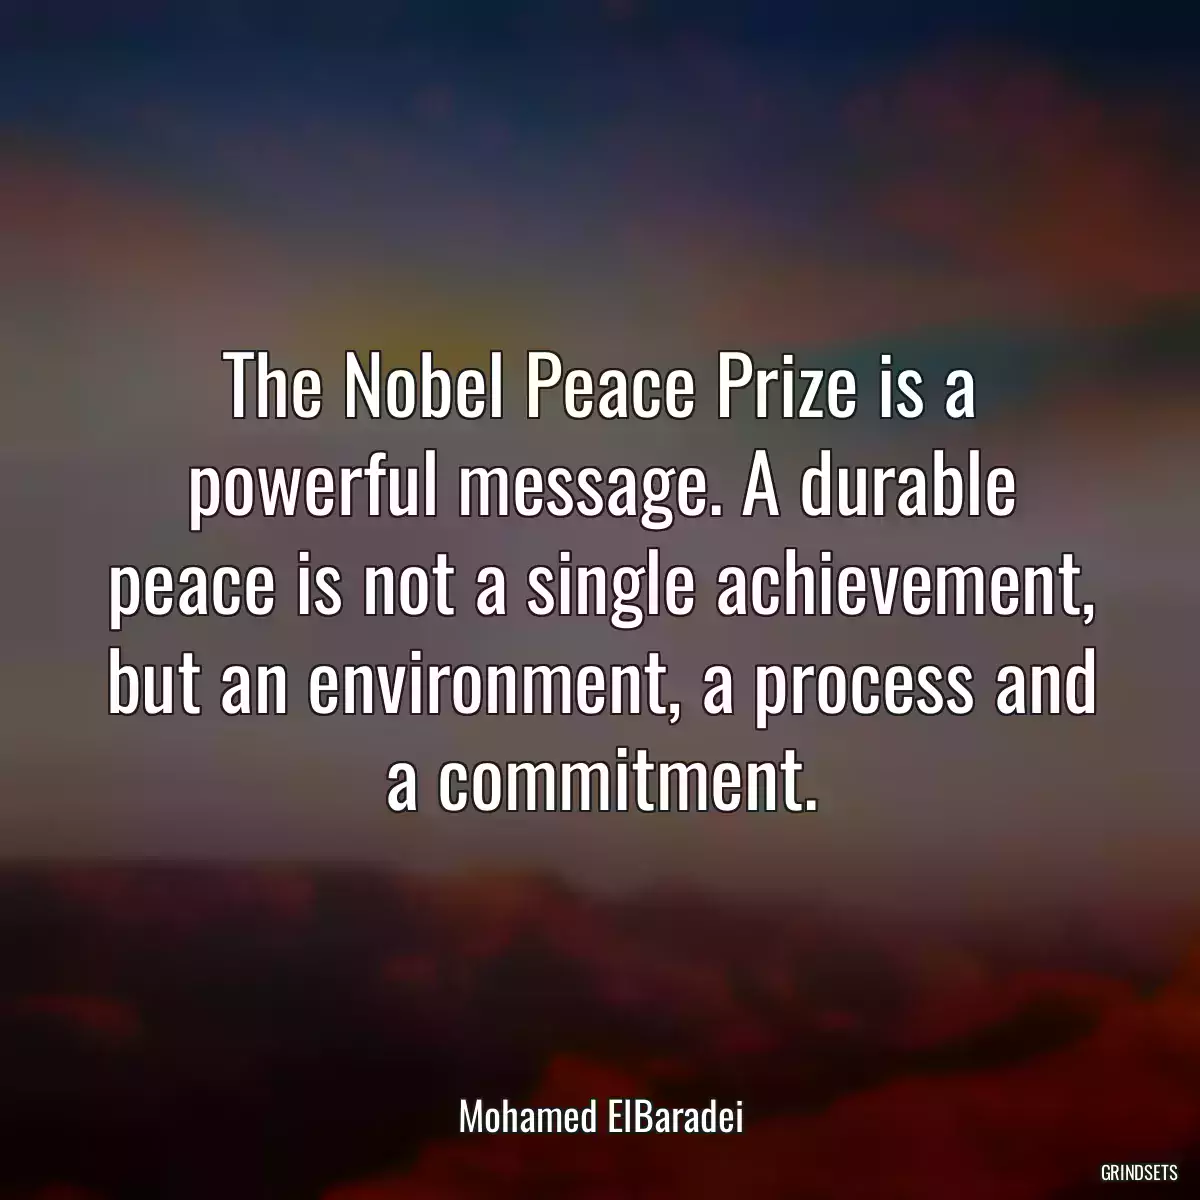 The Nobel Peace Prize is a powerful message. A durable peace is not a single achievement, but an environment, a process and a commitment.